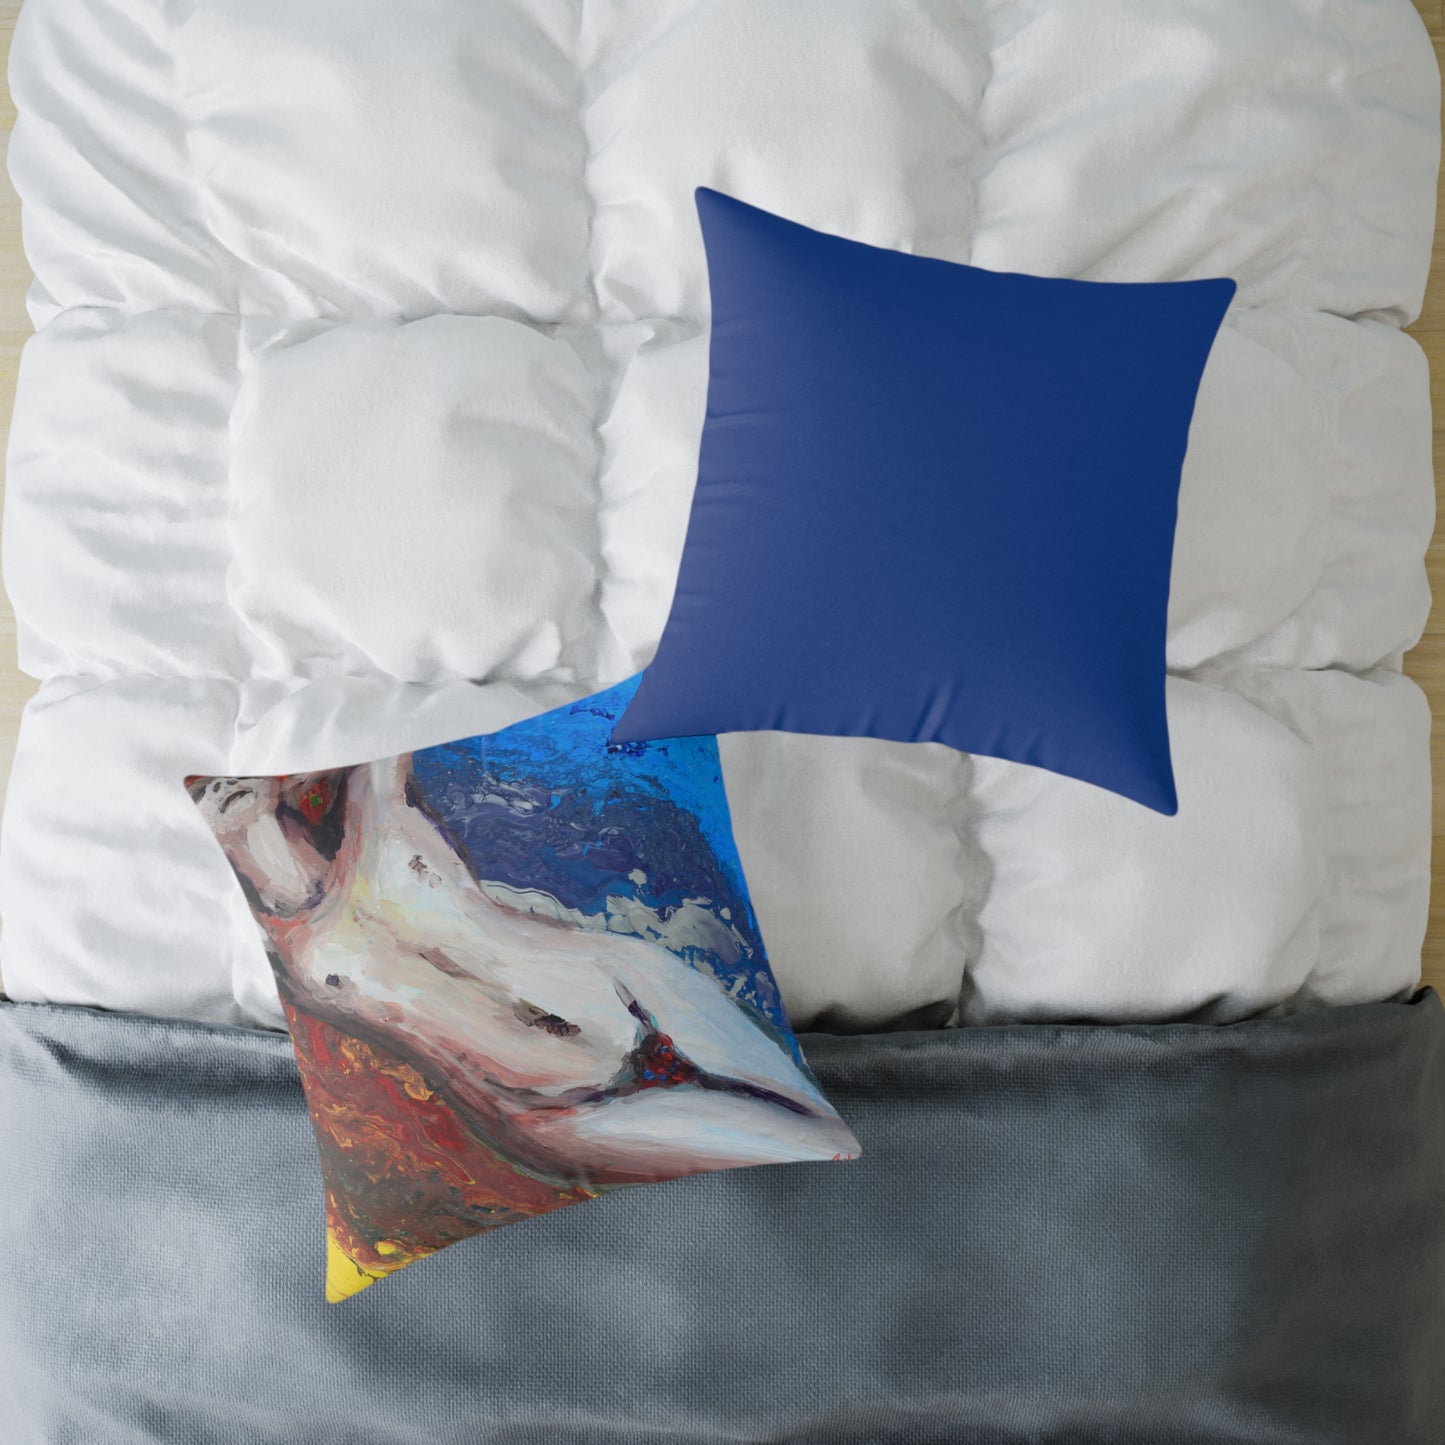 Streaming with the Elements Polyester Pillow